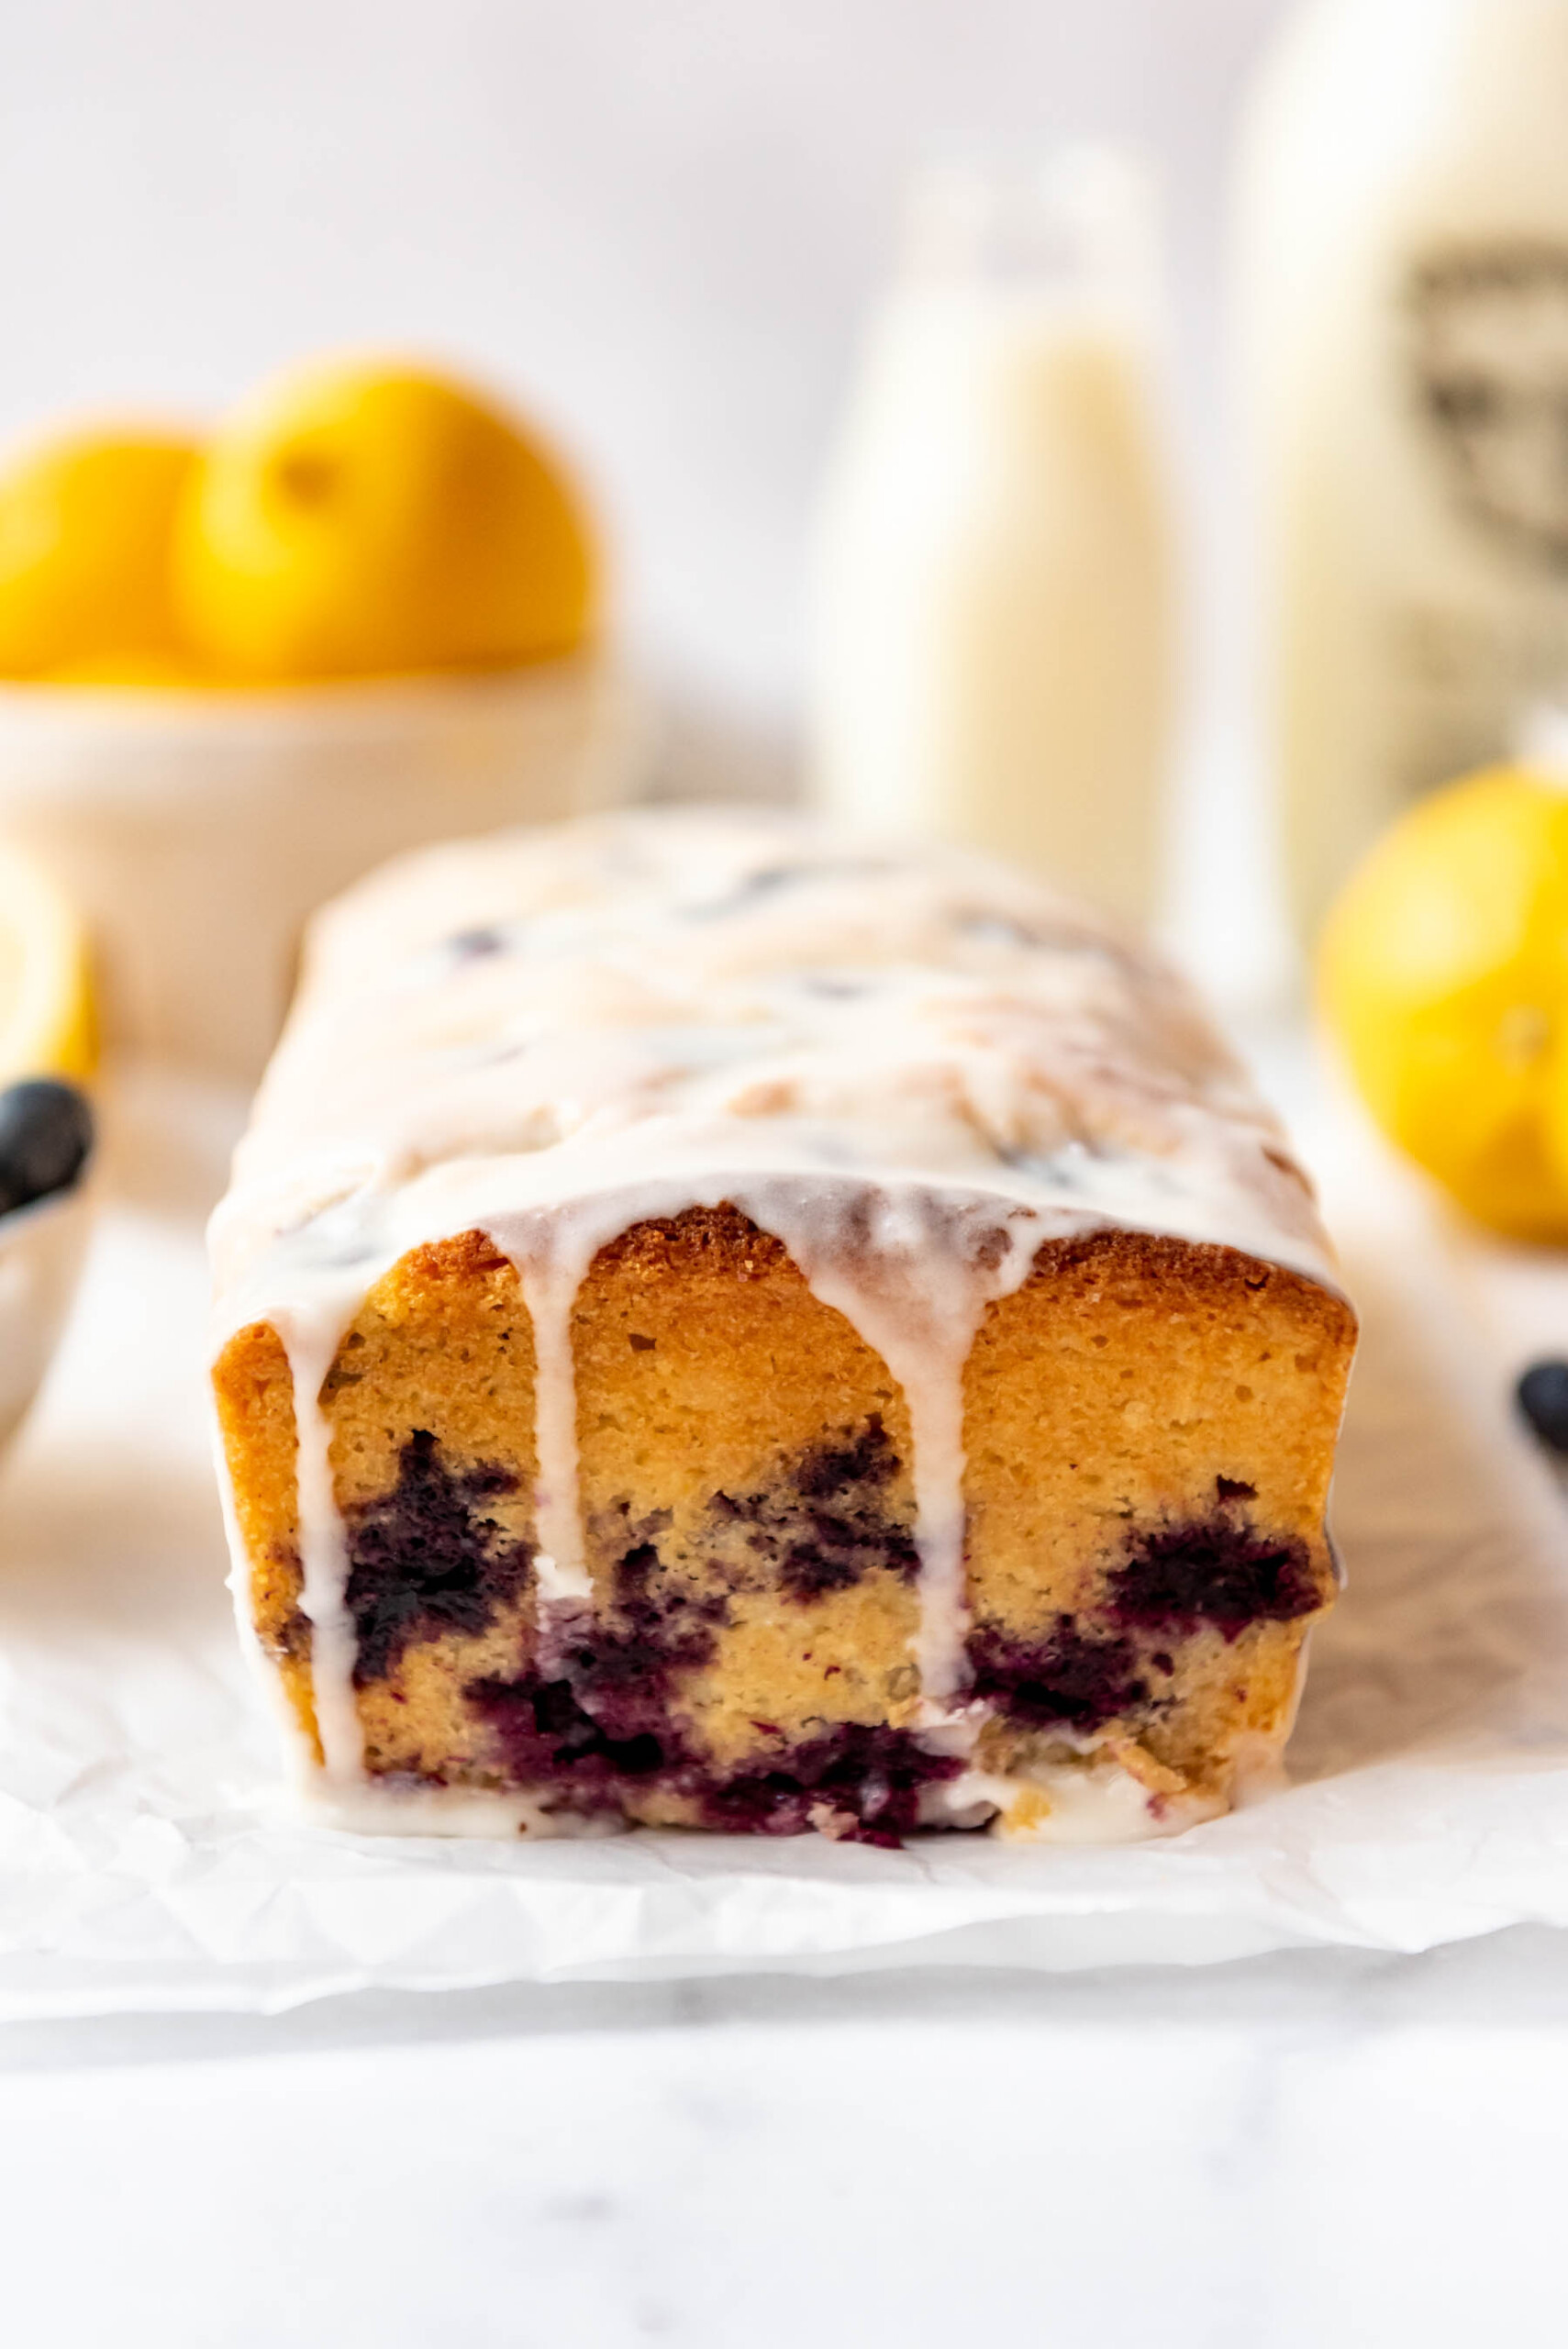 A glazed loaf of homemade lemon blueberry bread on white parchment paper.